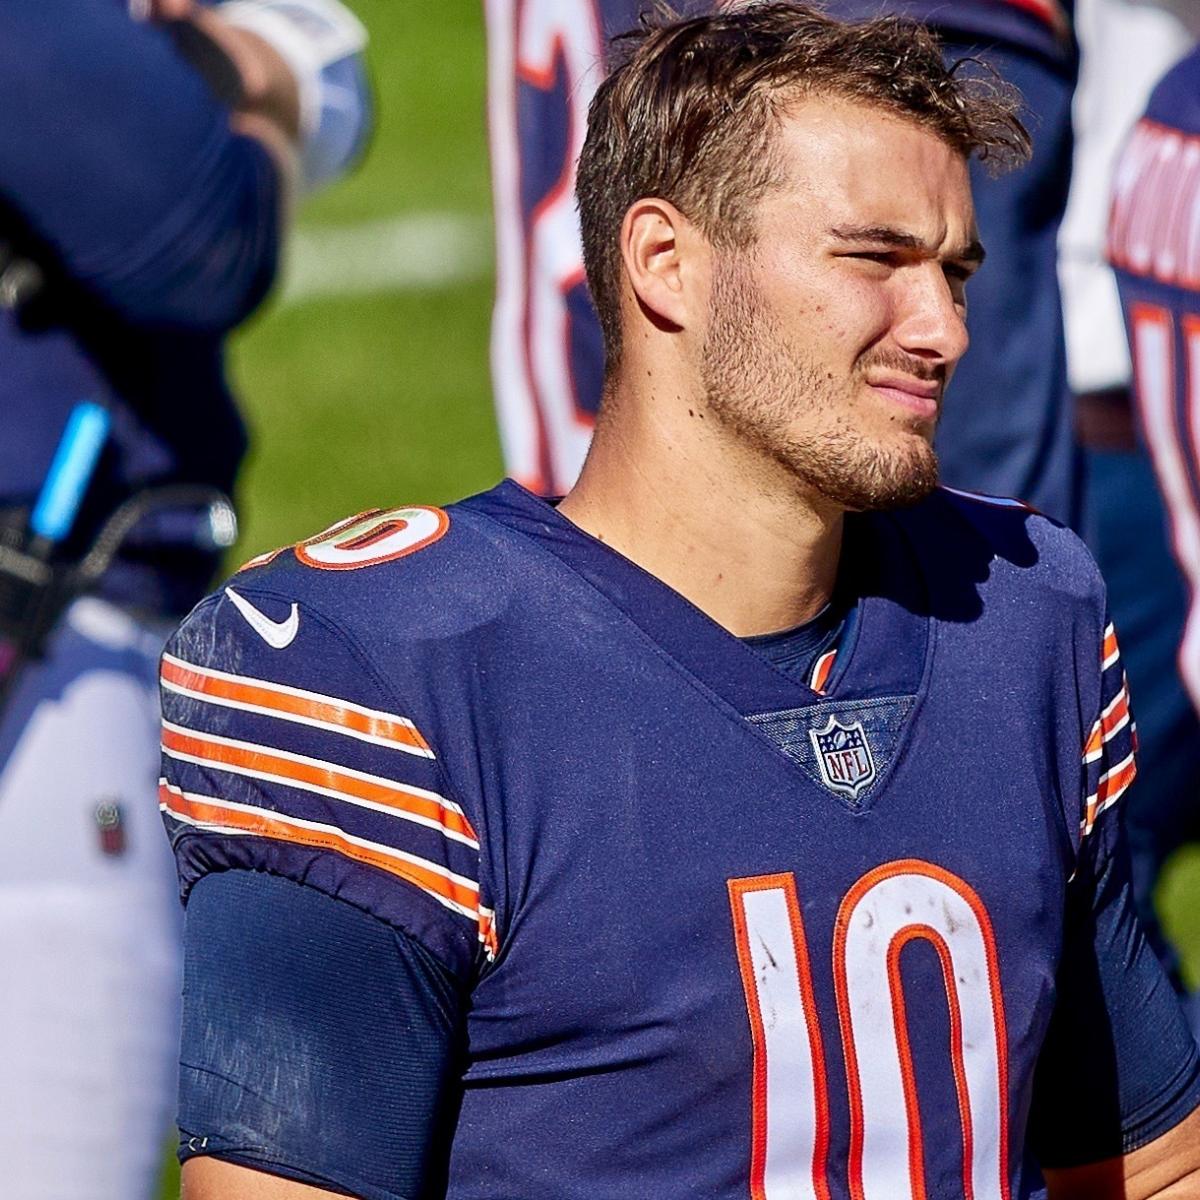 Why? How? The Bears, Trubisky and the Fateful 2017 NFL Draft